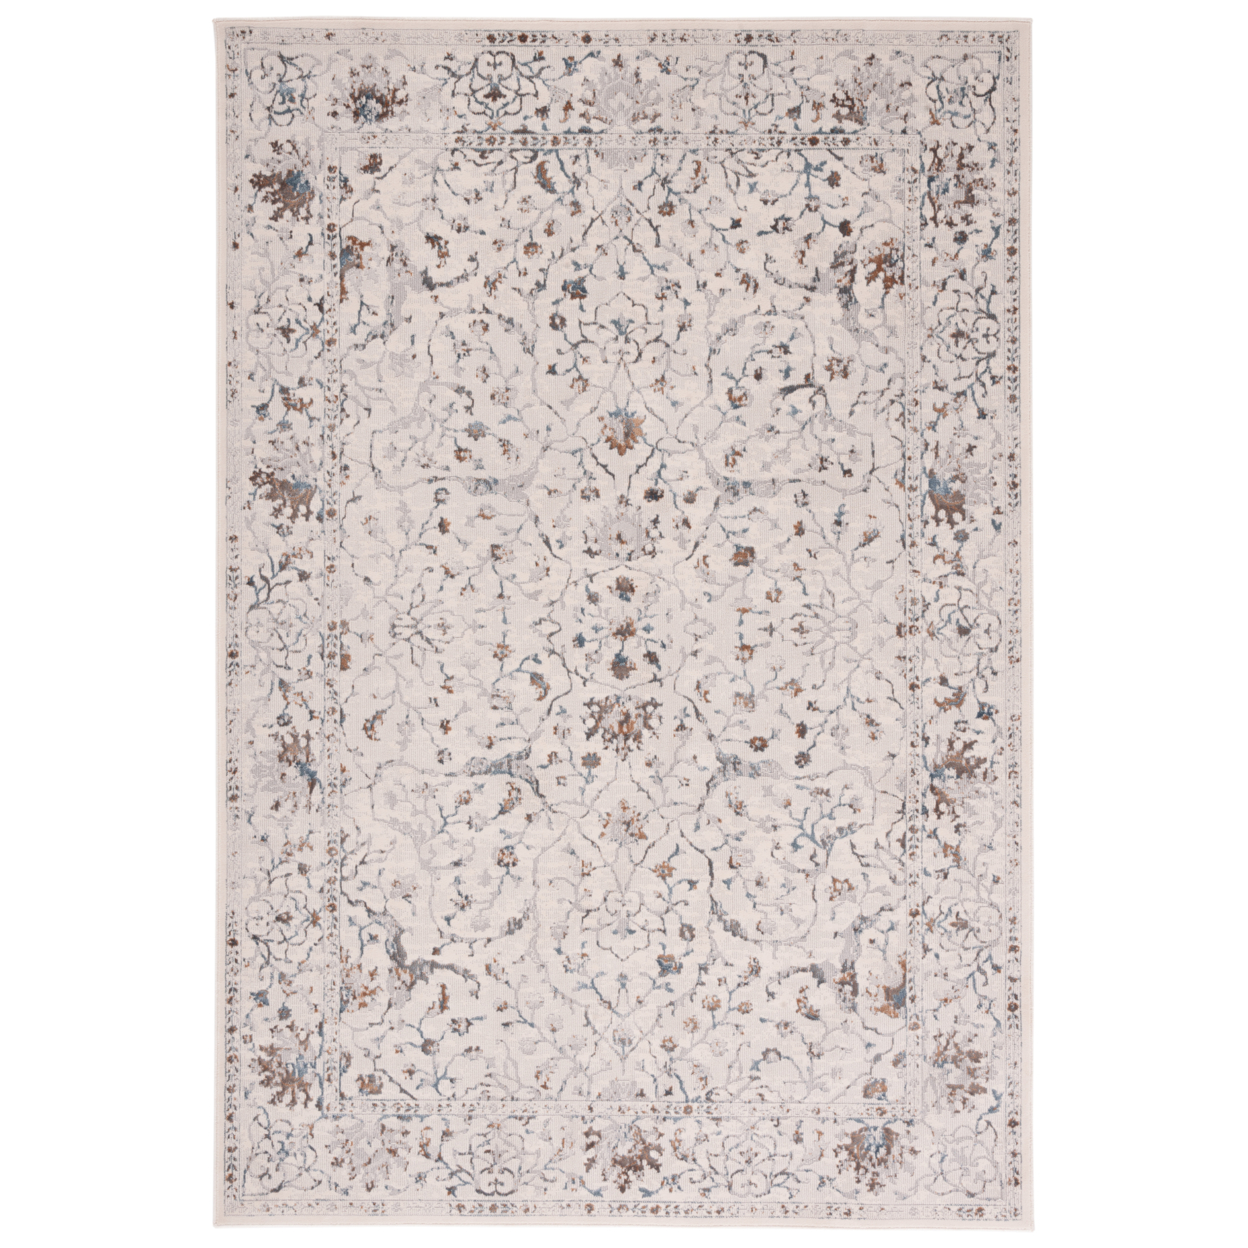 SAFAVIEH Noble Collection NBL771-7770 Multi / Beige Rug - 8' X 10'